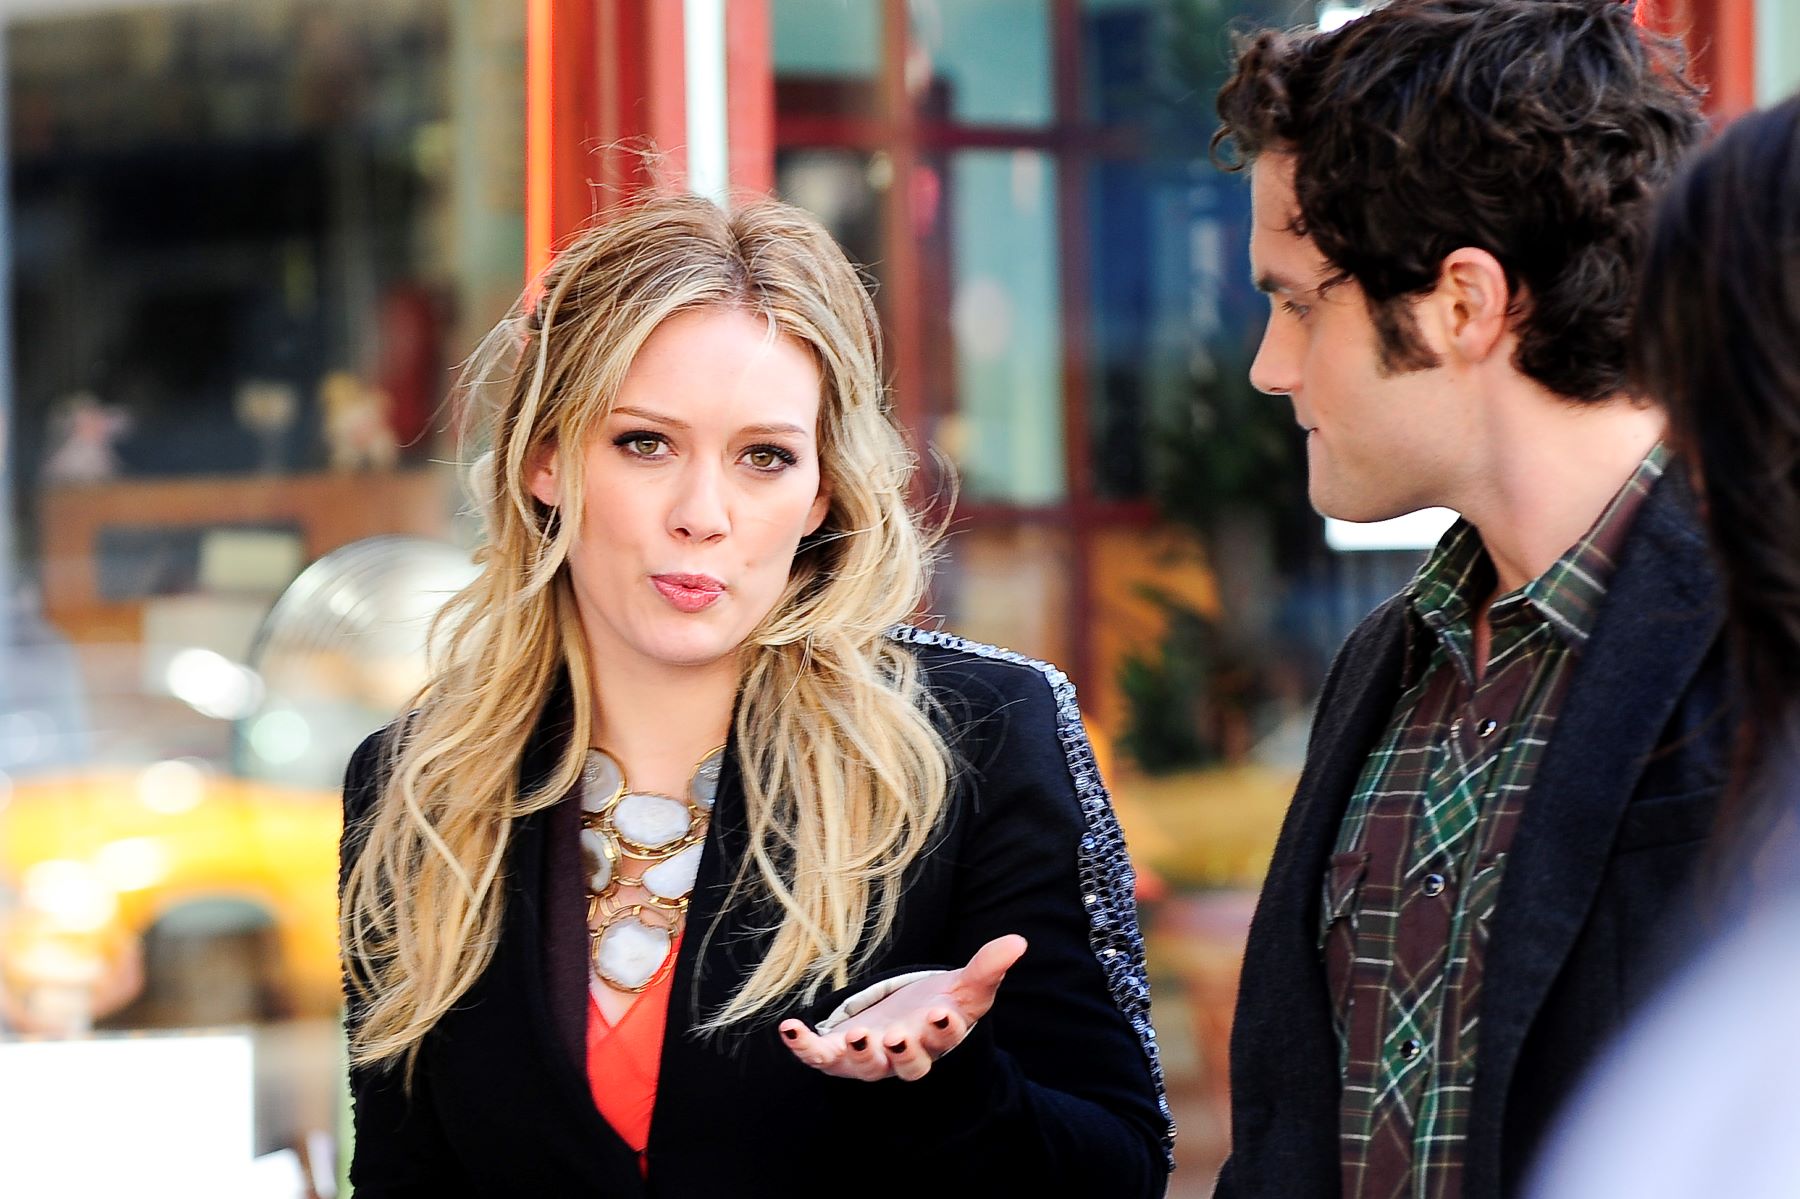 Hilary Duff and Penn Badgley filming the 'Gossip Girl' movie in Chelsea, New York City